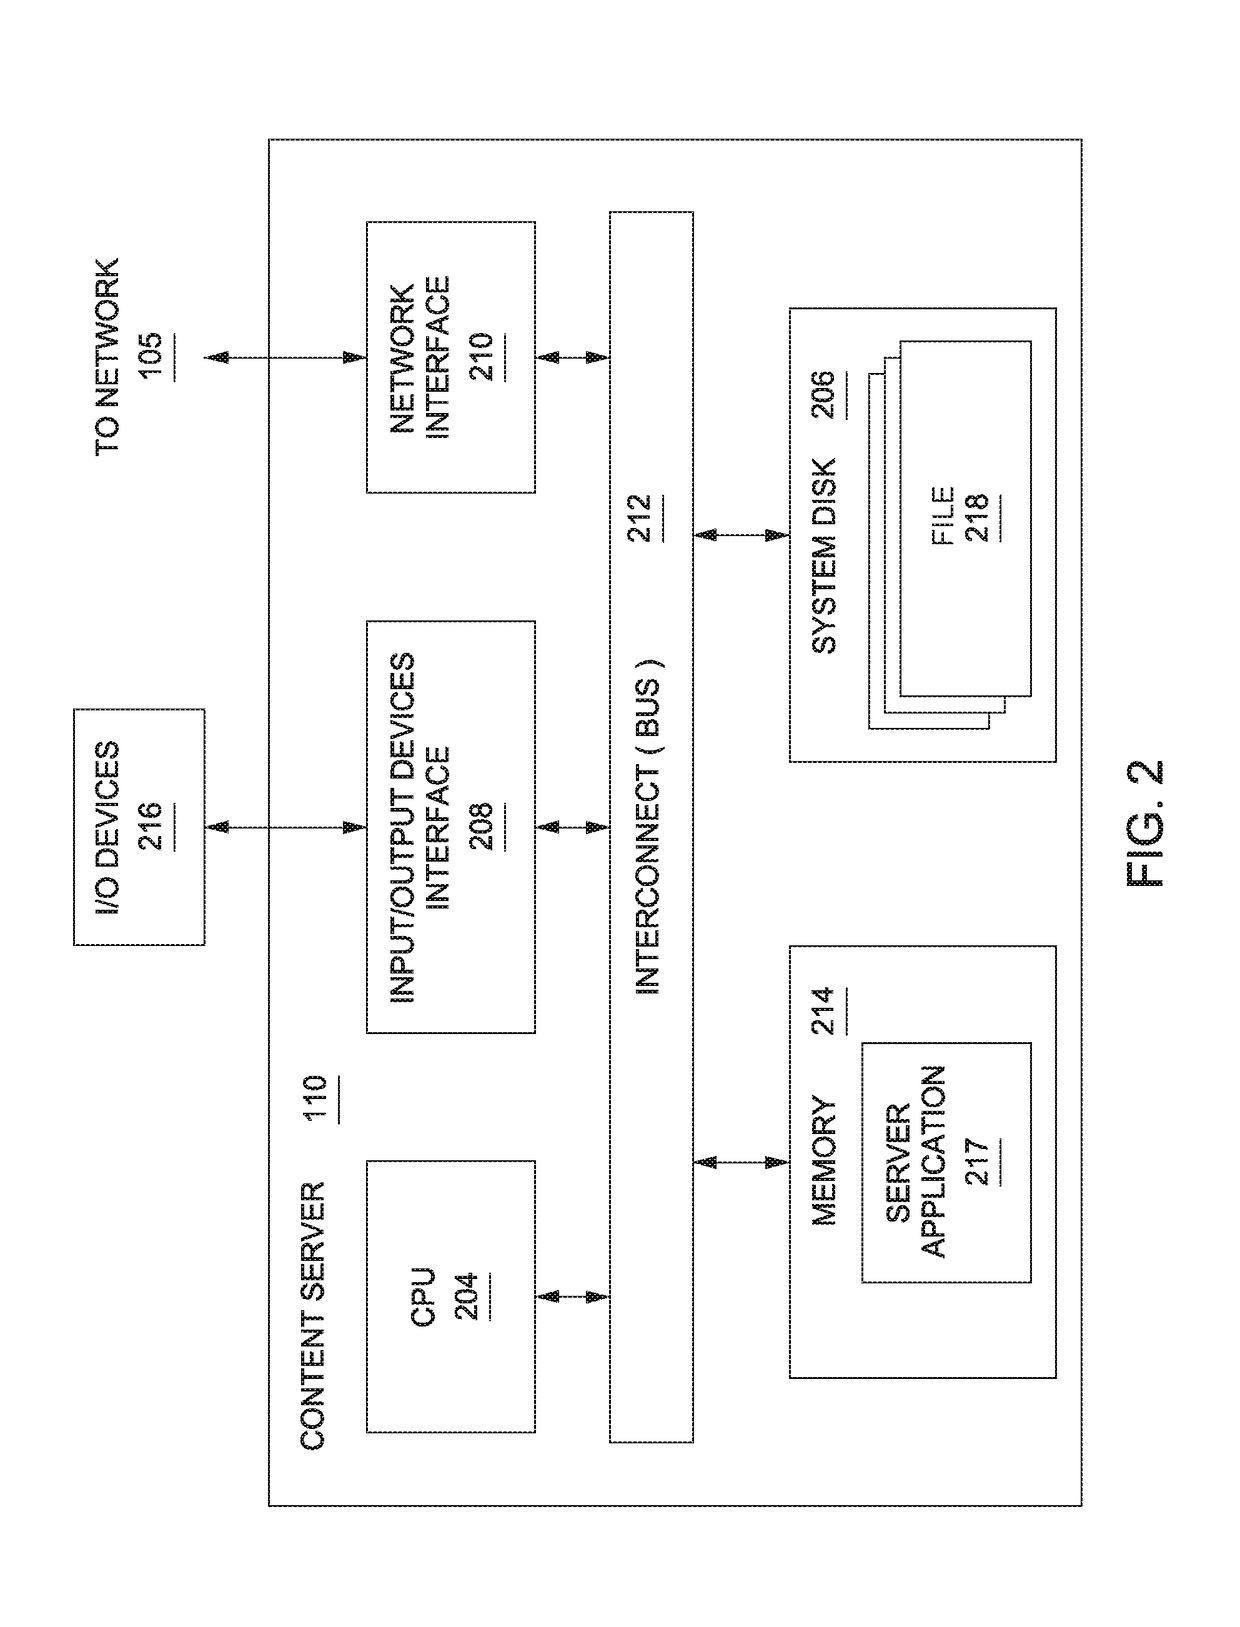 Detecting service vulnerabilities in a distributed computing system